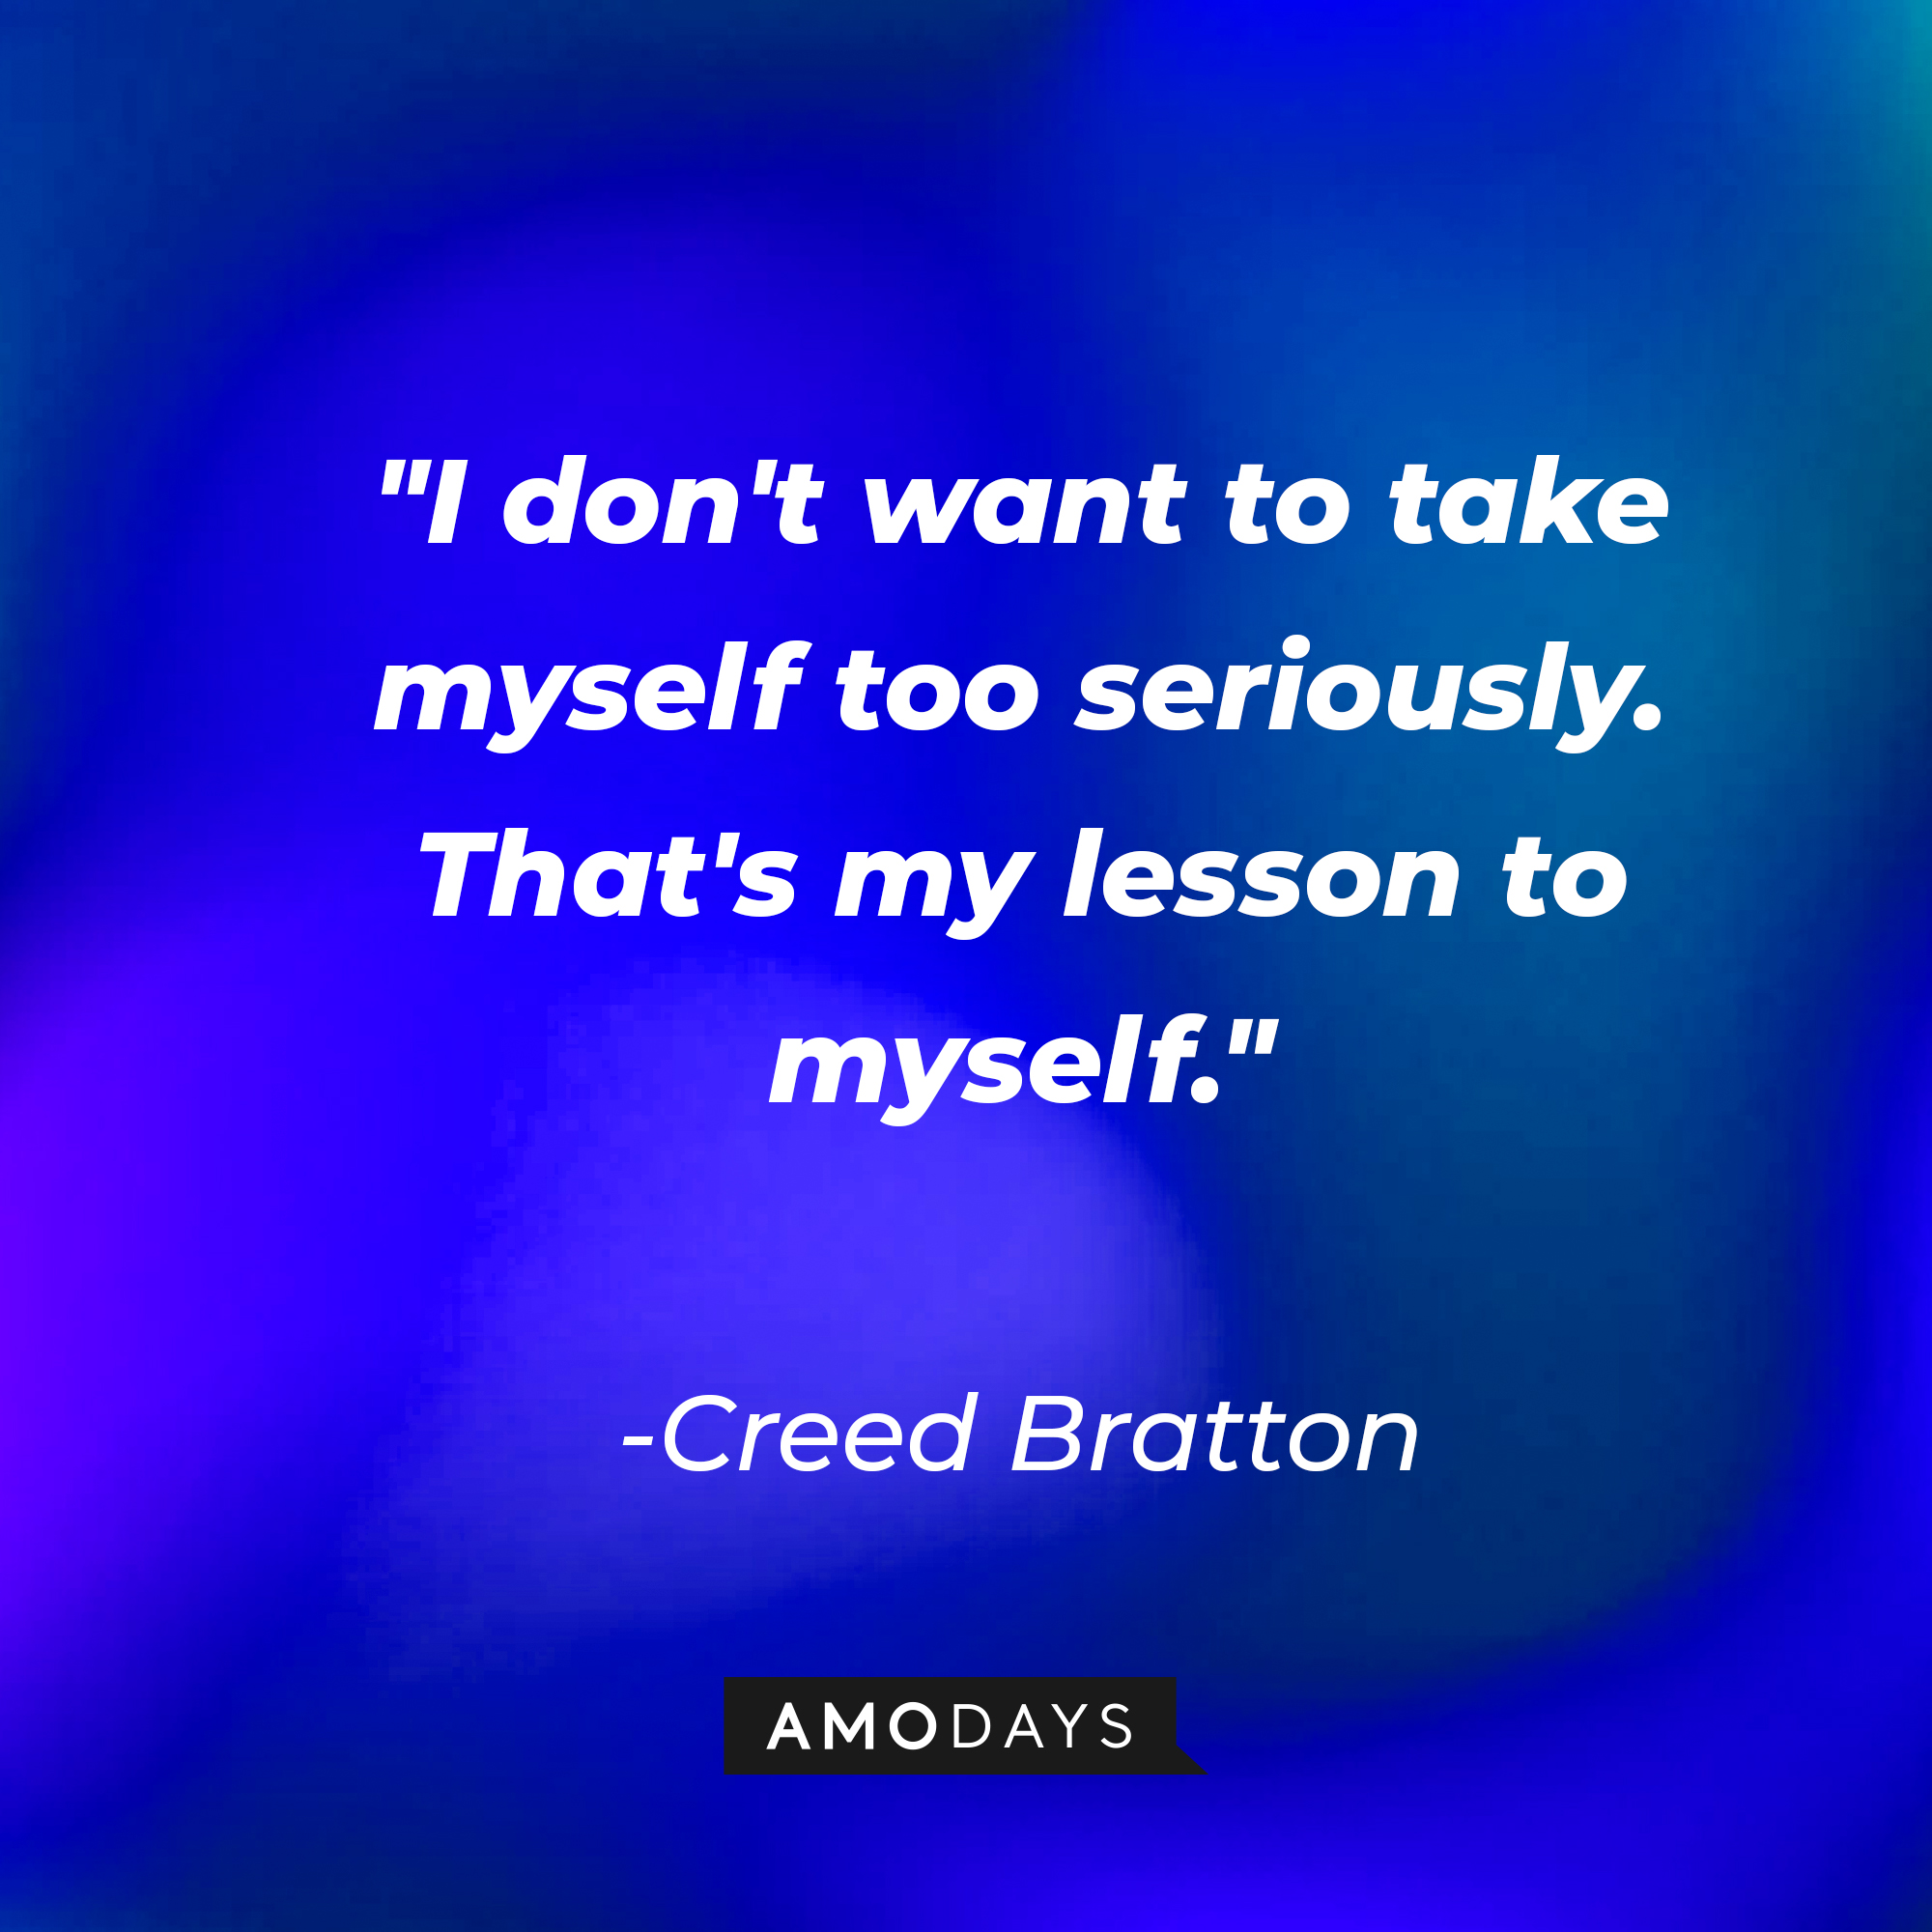 Creed Bratton's quote: "I don't want to take myself too seriously. That's my lesson to myself." | Source: AmoDays